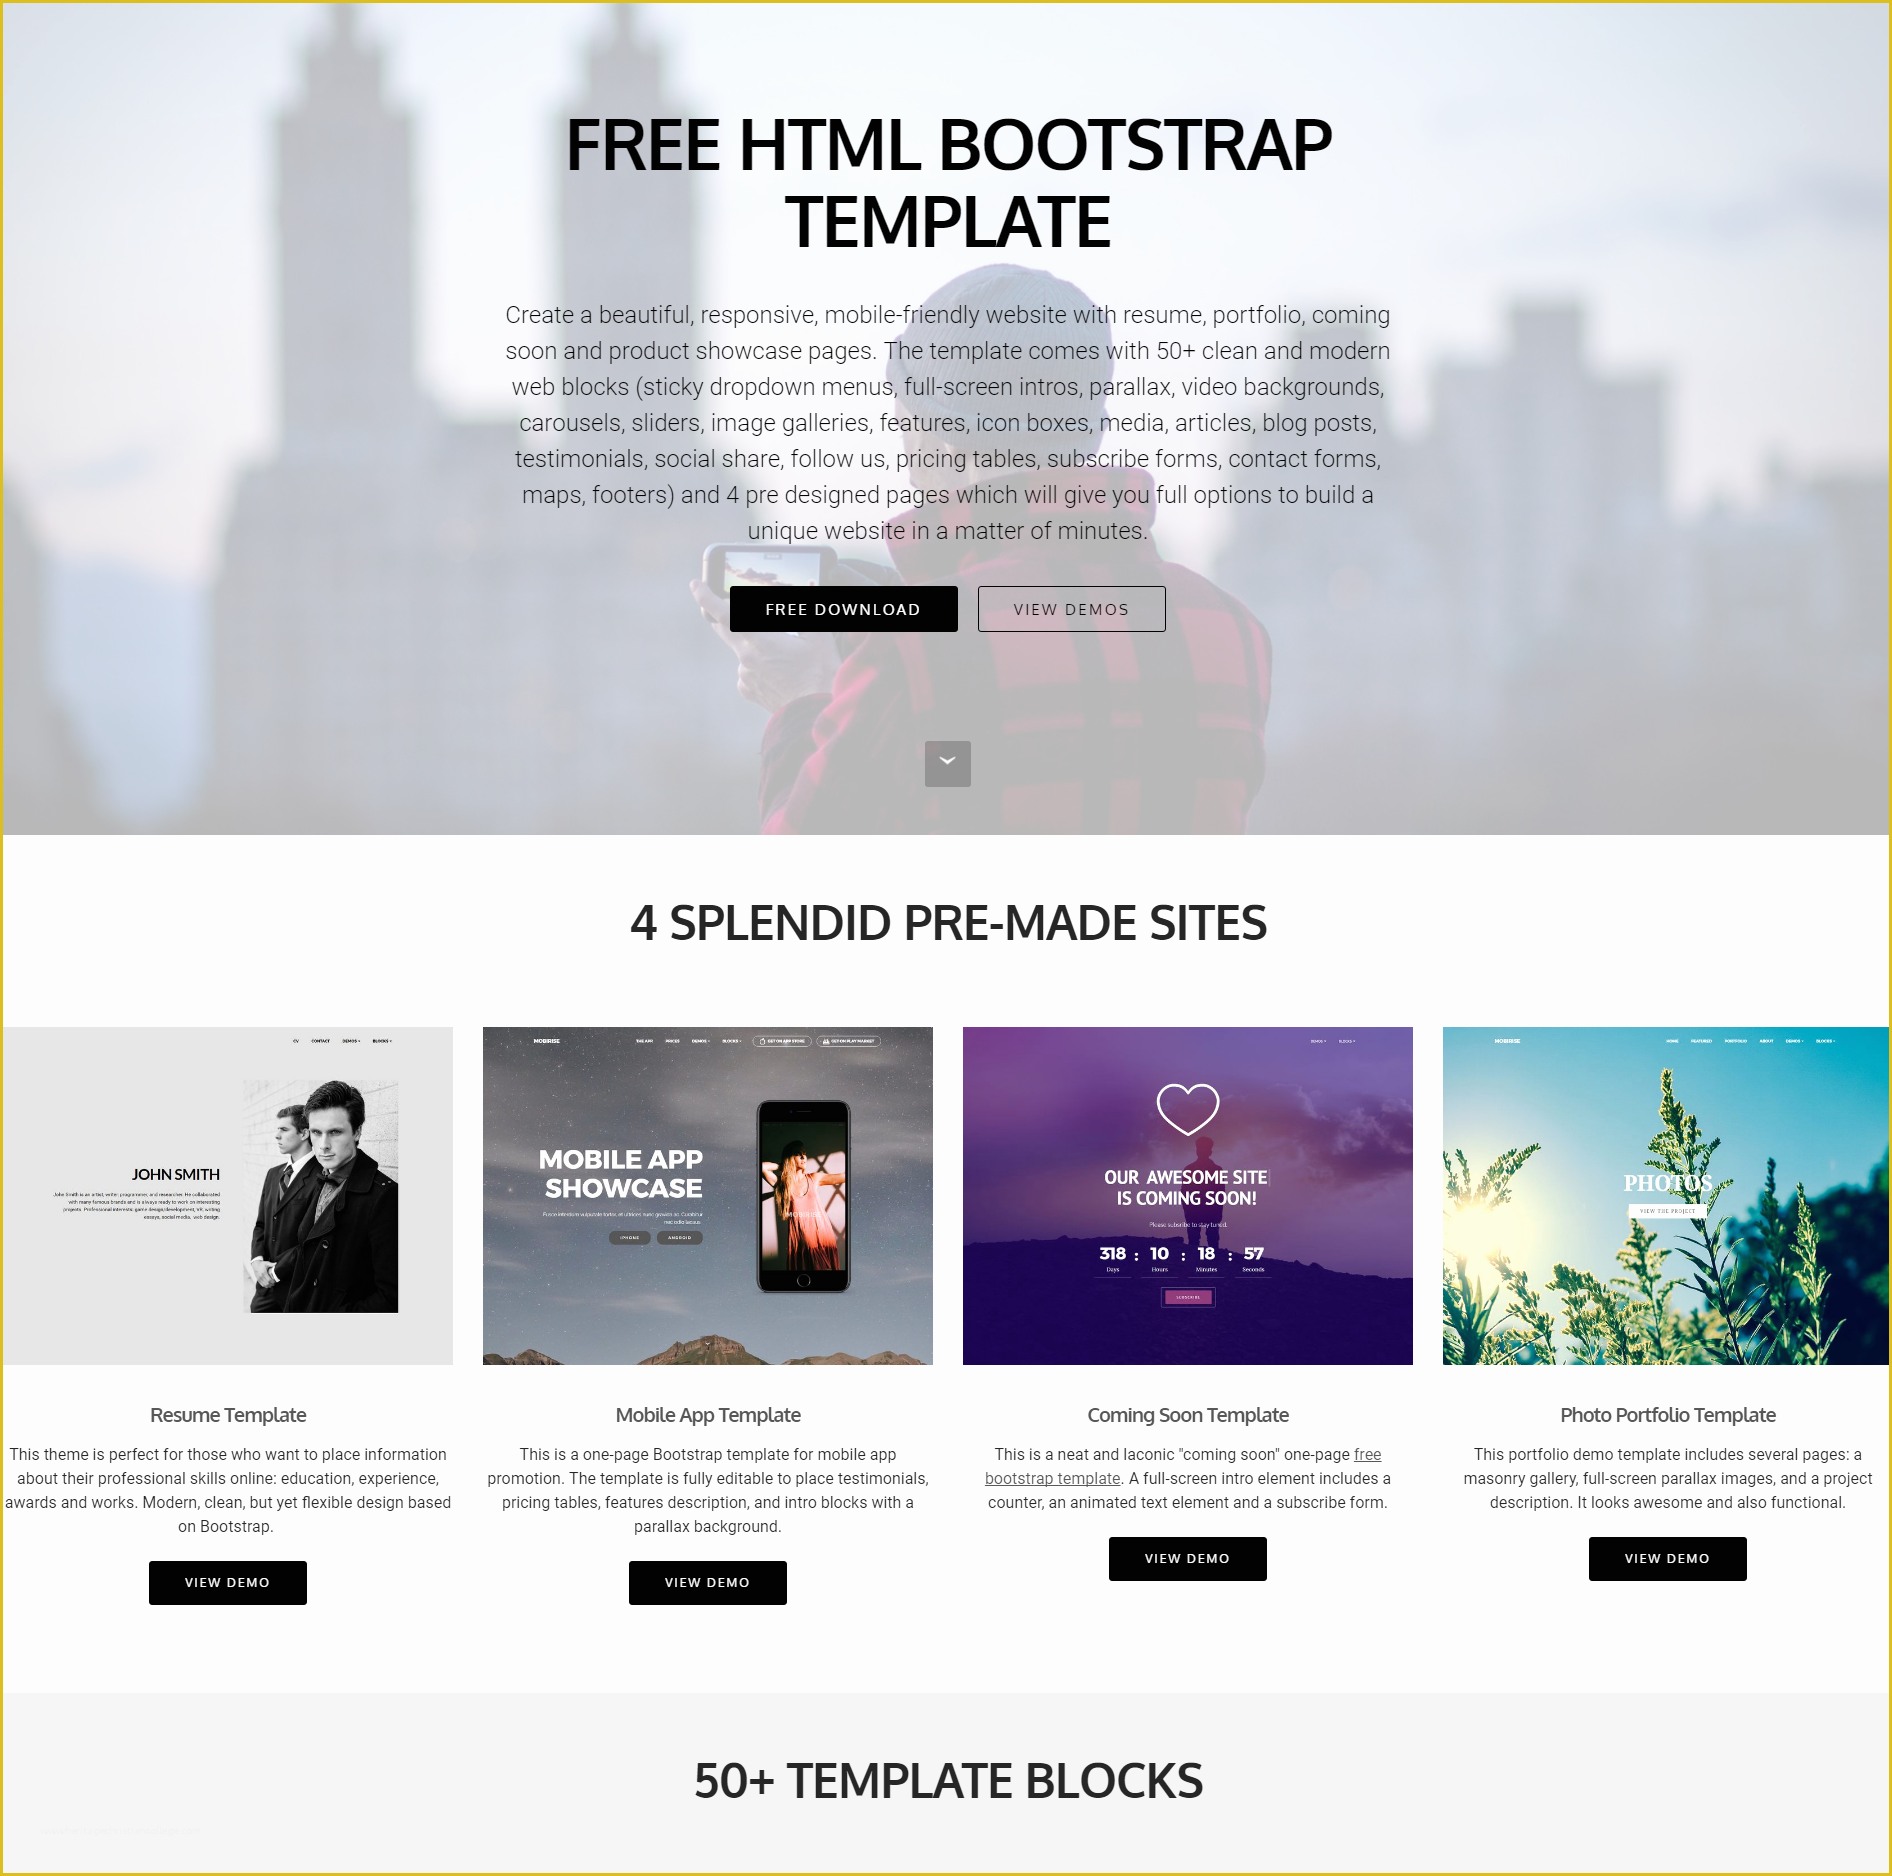 Free Design Templates Of 39 Brand New Free HTML Bootstrap Templates 2019